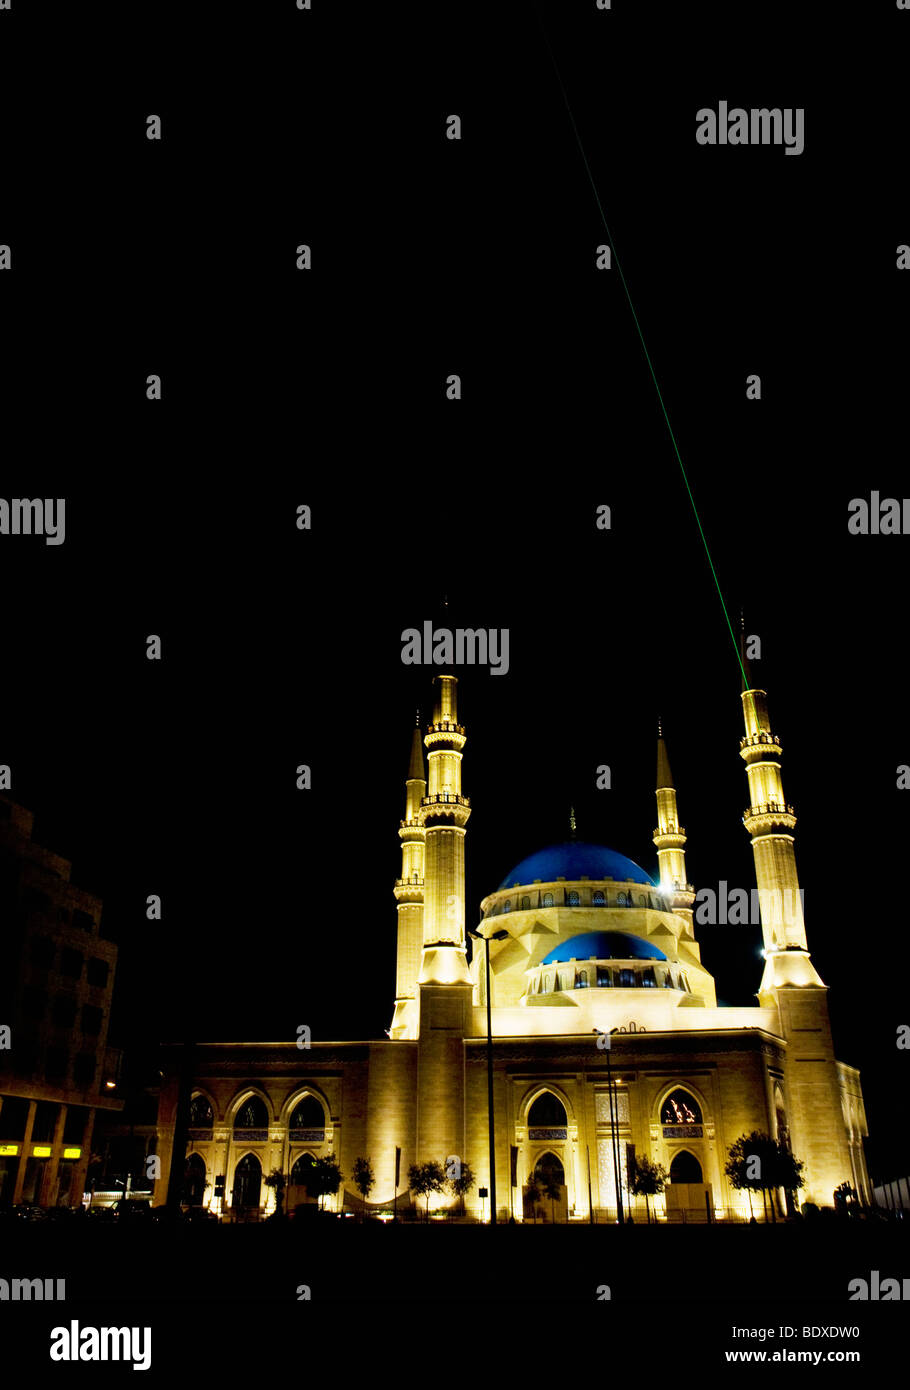 The Mohammad al-Amin mosque in Beirut, Lebanon. A green laser beam arrowing from one of the minarets is aimed towards Mecca. Stock Photo